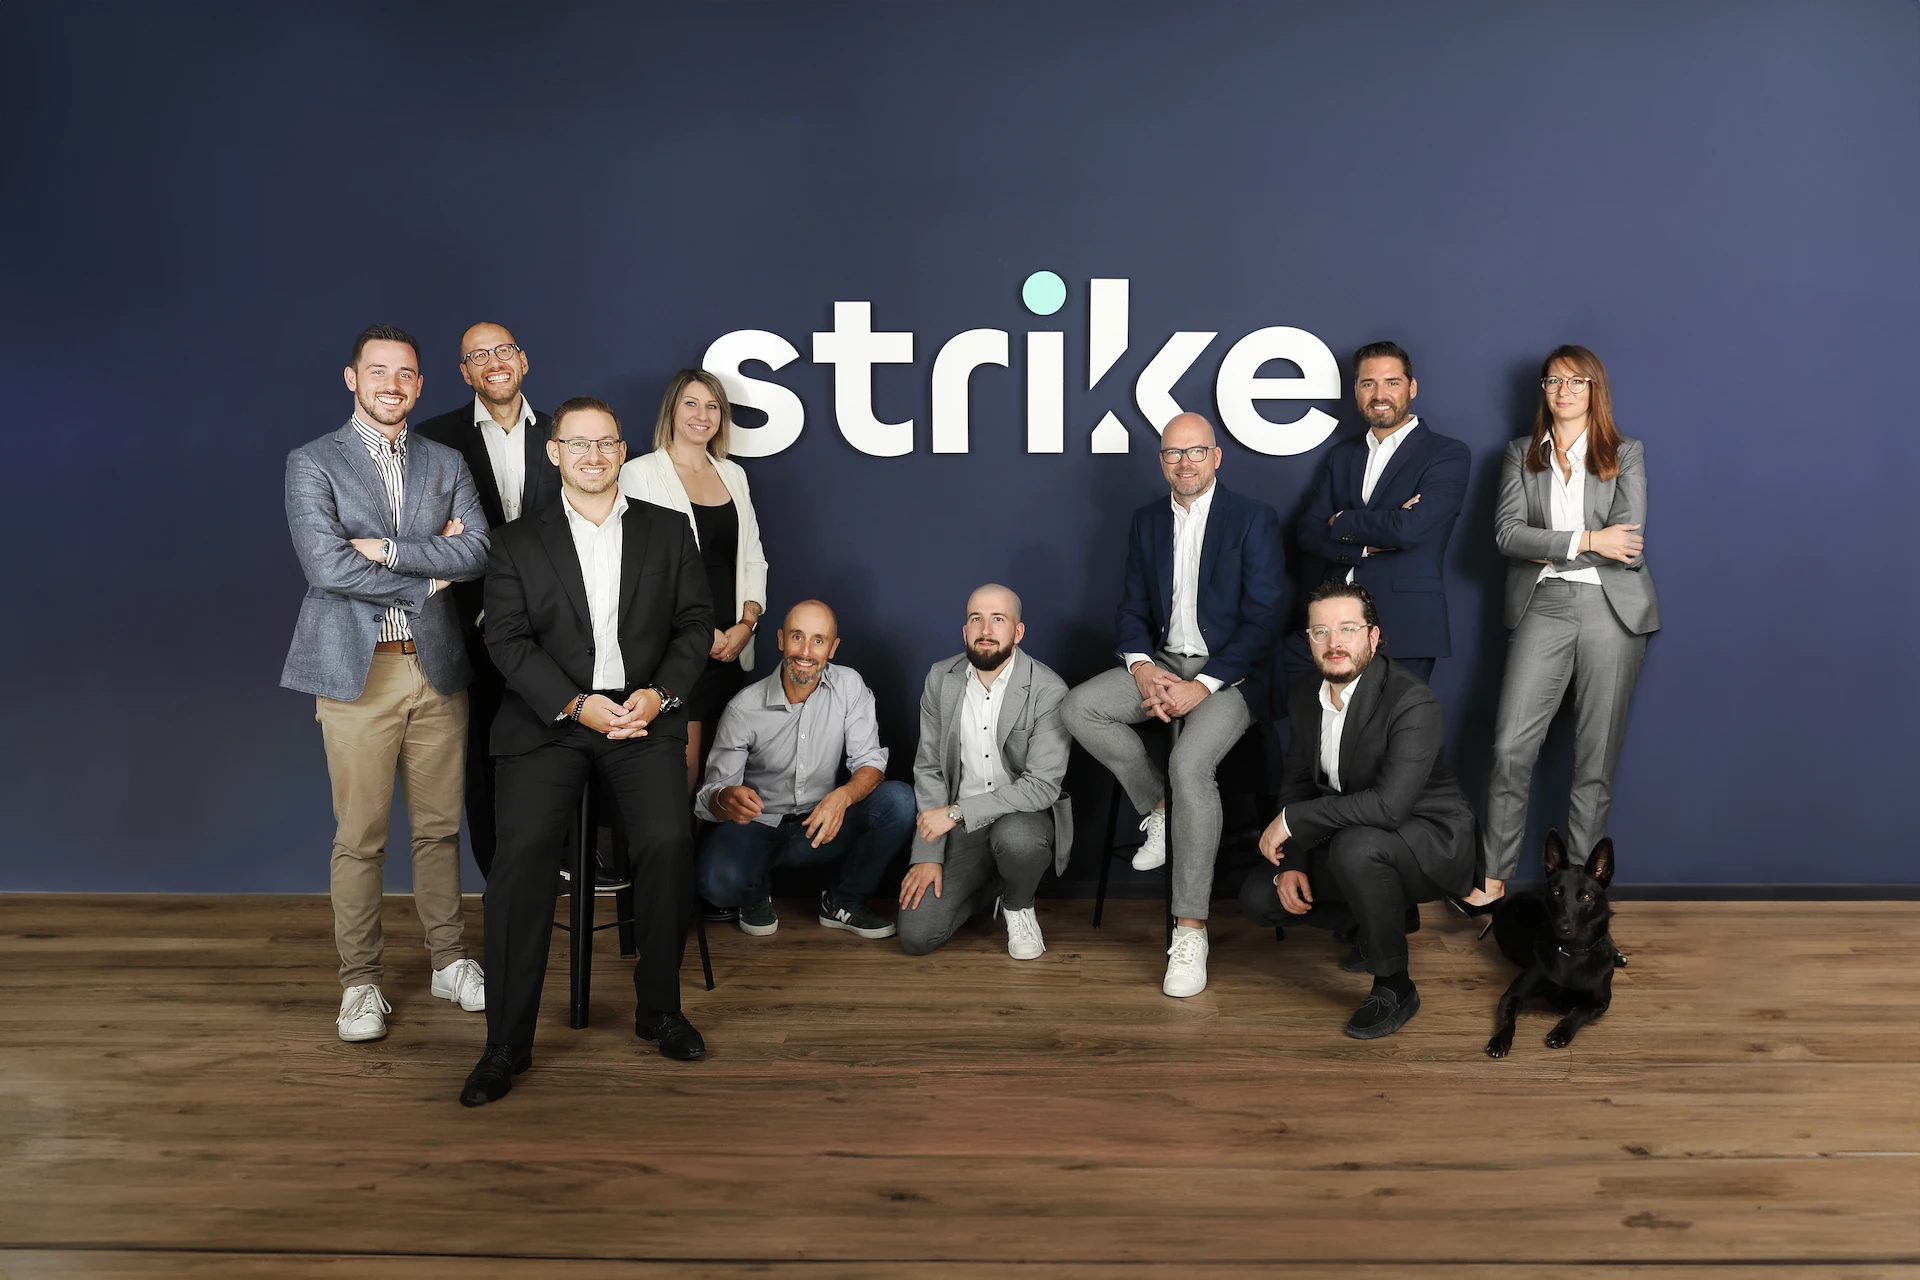 The entire Strike team in Switzerland poses casually at the company's Lausanne headquarters.